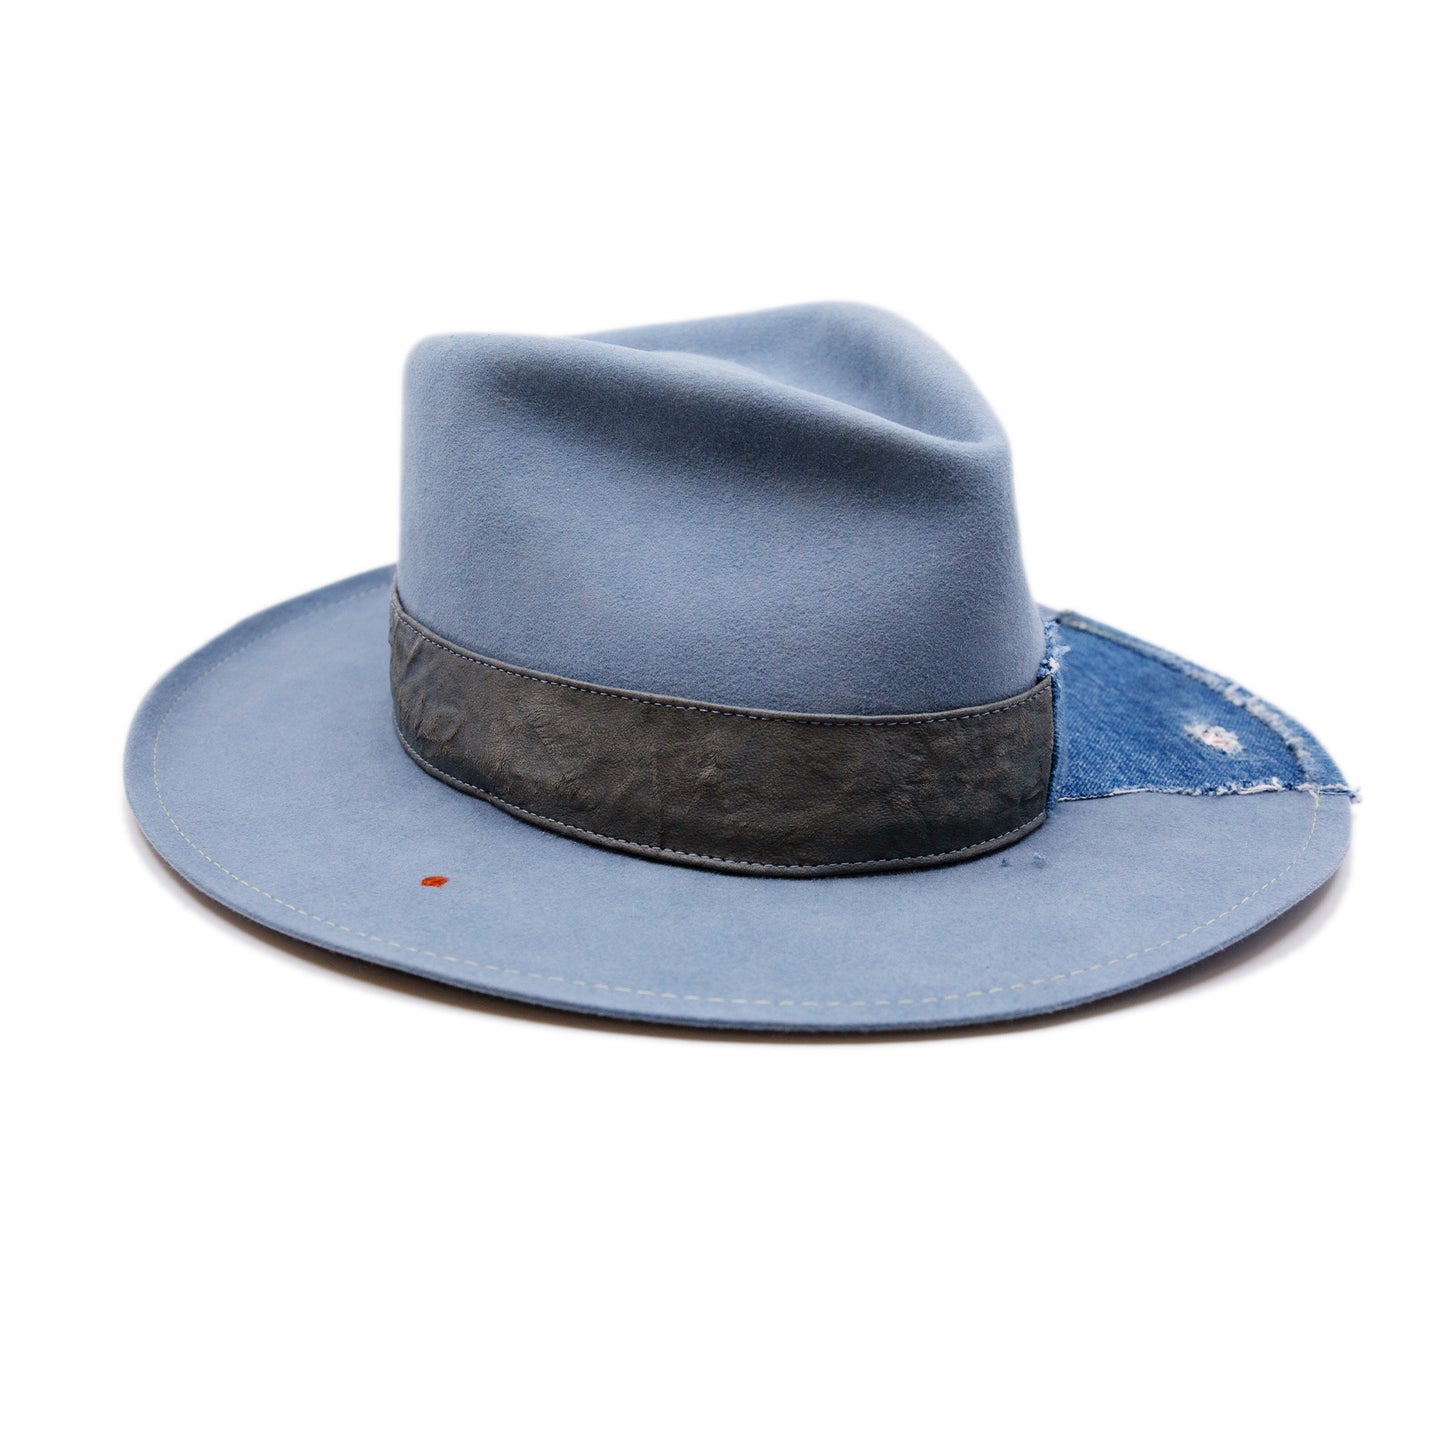 Lynn Hat  100% felt hat in Powder Blue  Dress Weight  Hand cut band from deadstock selvedge denim and calfskin leather  1/4" denim patch on brim with mending  1⁄4“ ticking on brim  Multicolor accent hand embroidery  Back pencil curled brim  Made in USA